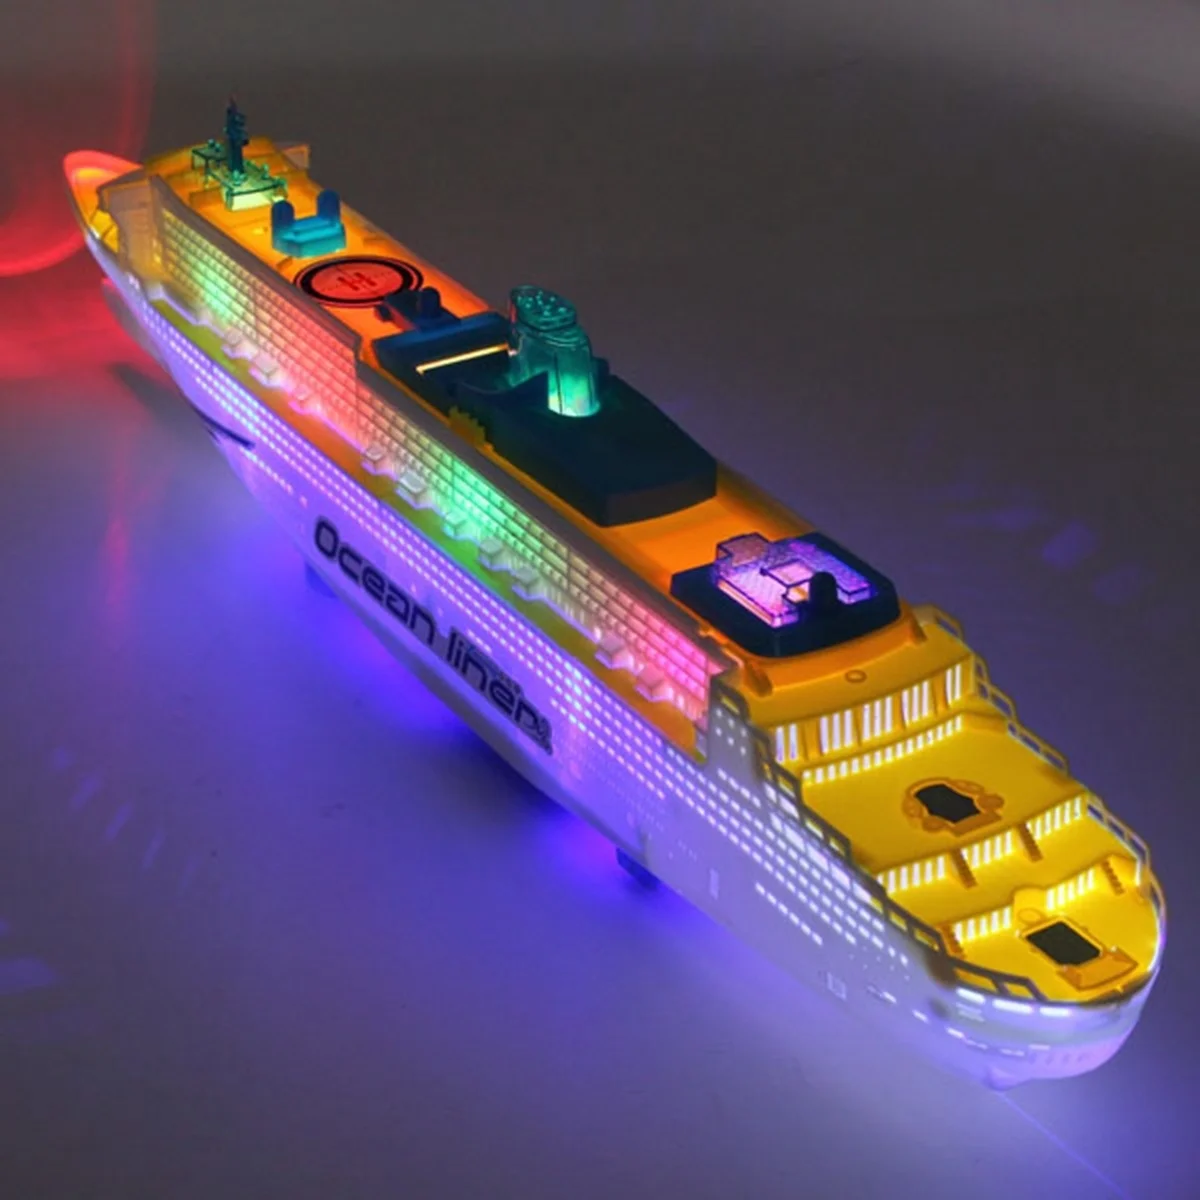 Light Music Ocean Liner Ship Model Flashing Sound Electric Cruises for Children Kids Boat Toys Gift Automatic Steering  YJS Drop